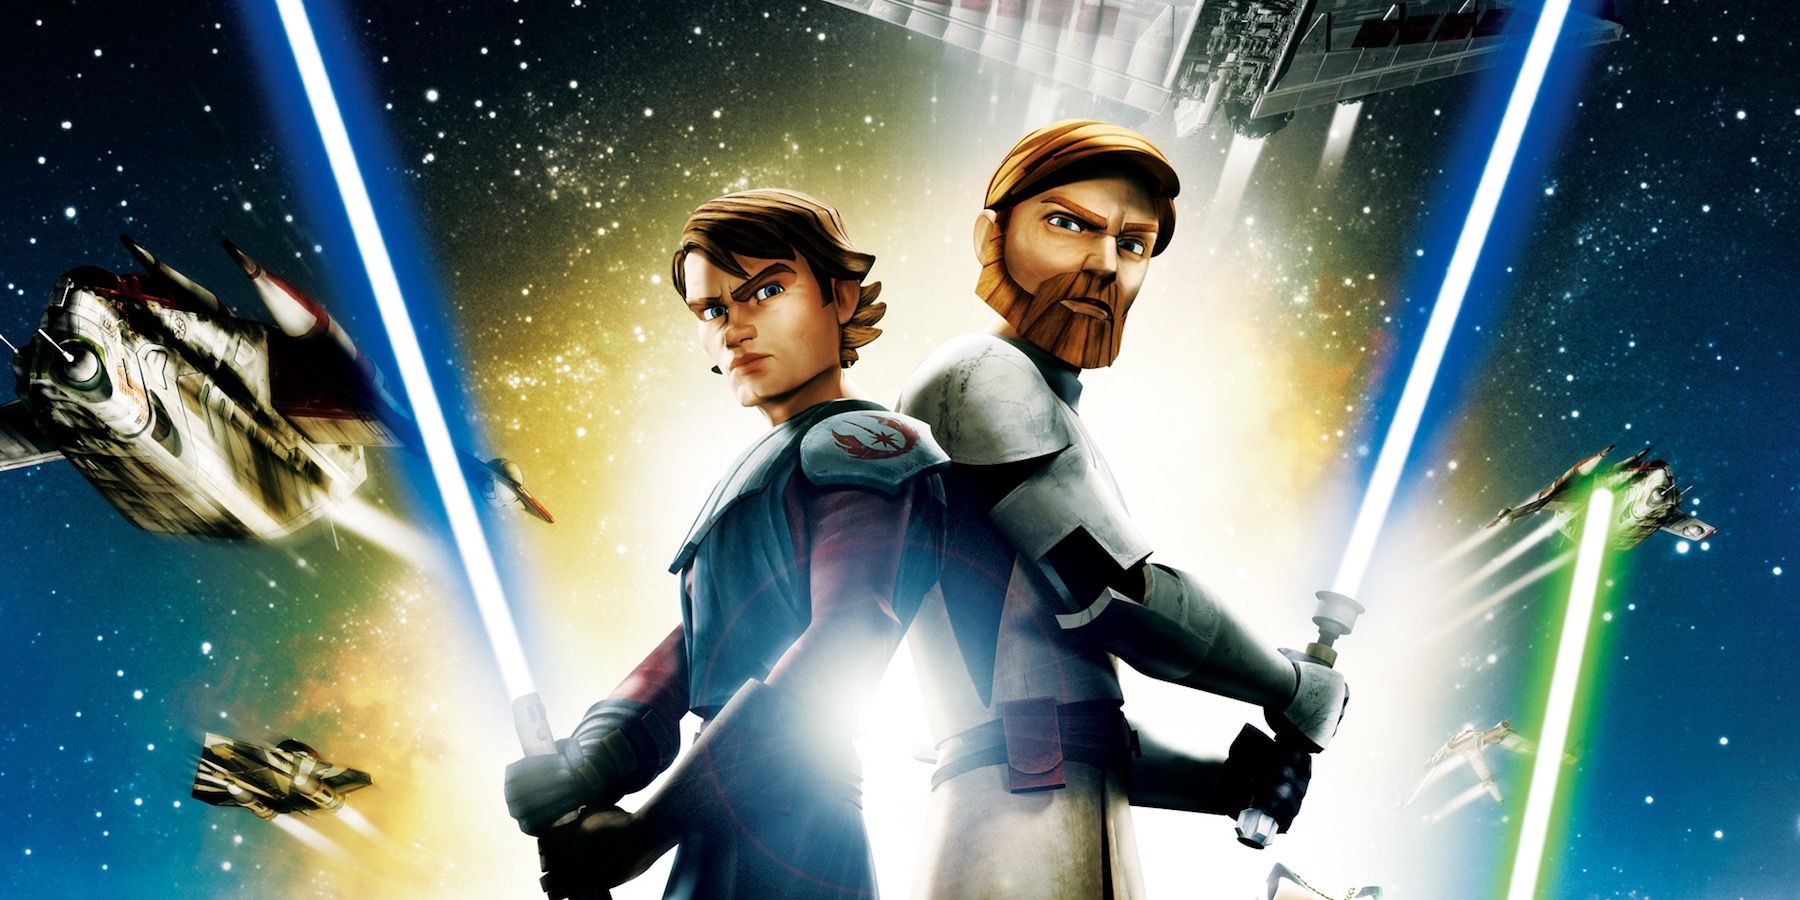 Star Wars The Clone Wars Poster